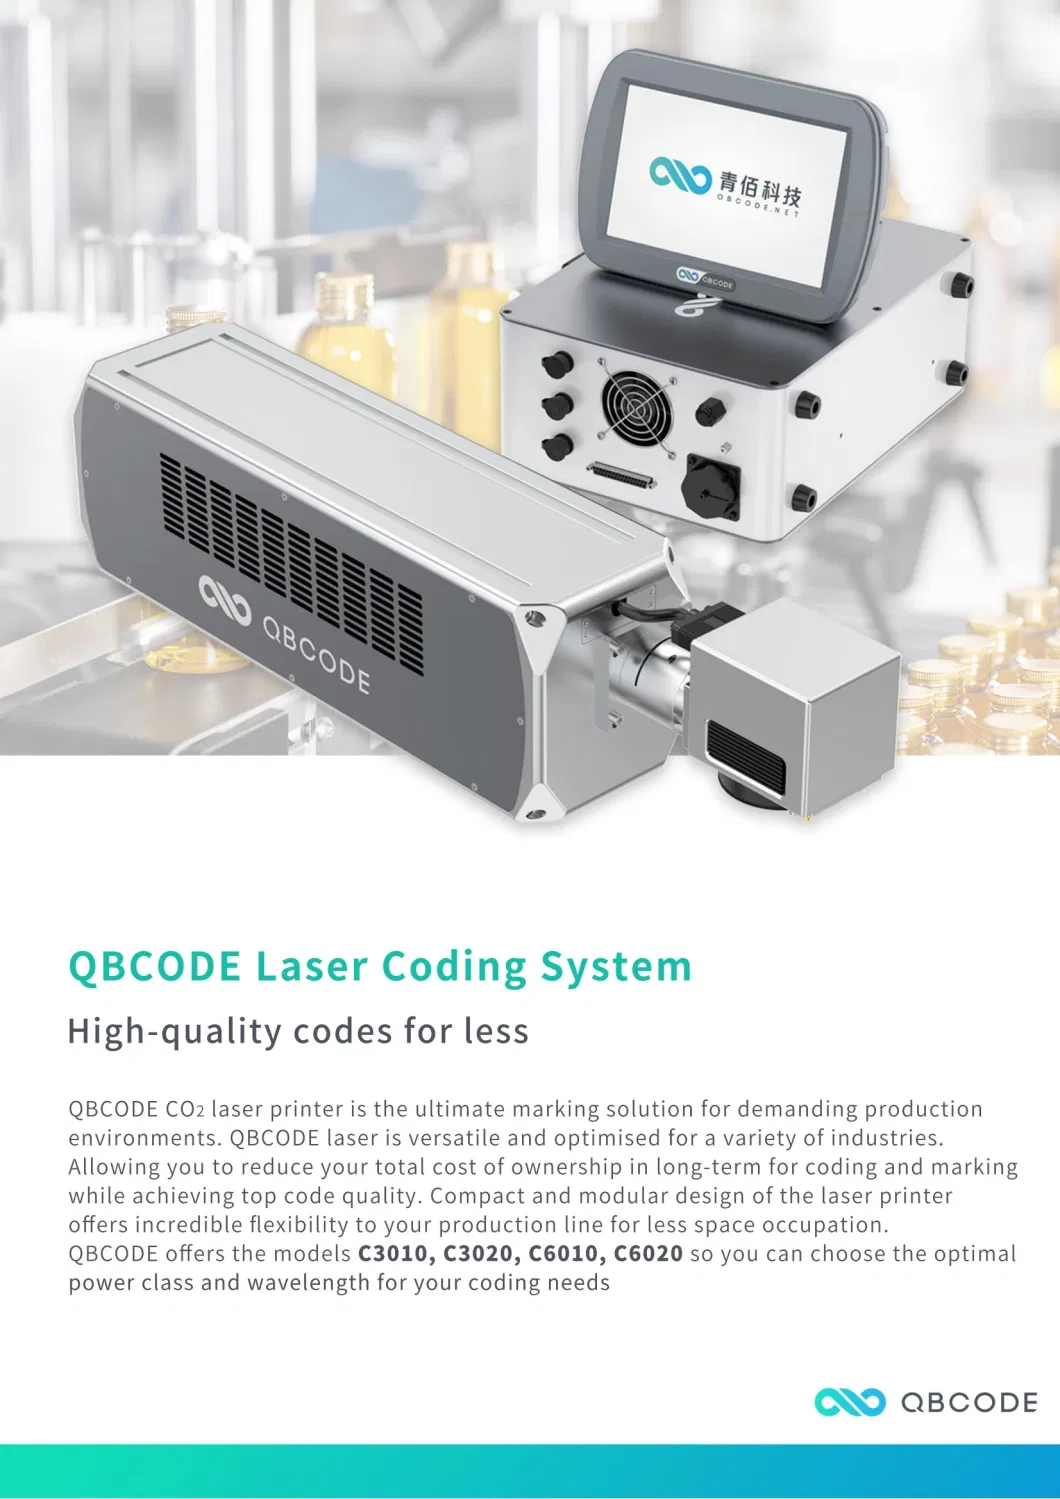 Qbcode Date Printer 30W Fly CO2 Laser Marking Printing Machine for PVC Pipe, Metal, Plastic with CE Certification